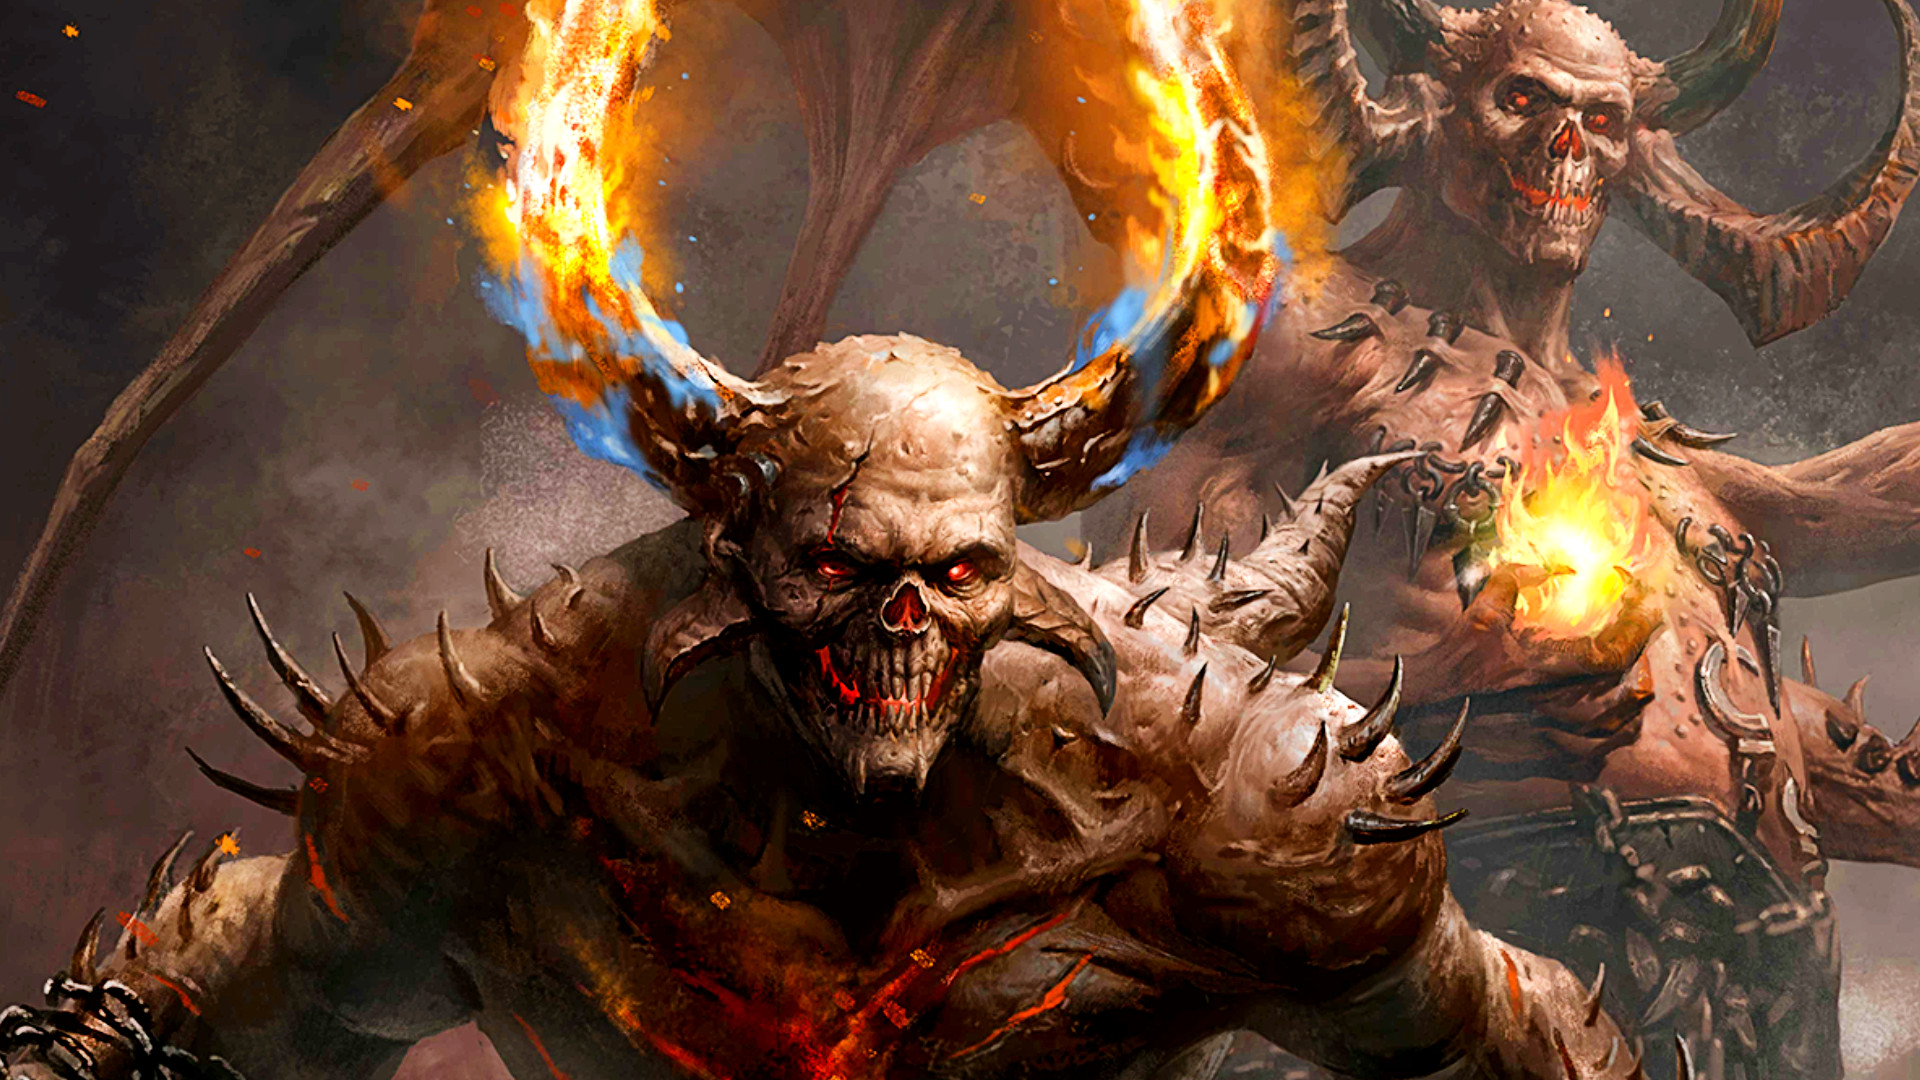 Diablo Immortal patch 1.5.5 adds new Helliquary boss and battle pass